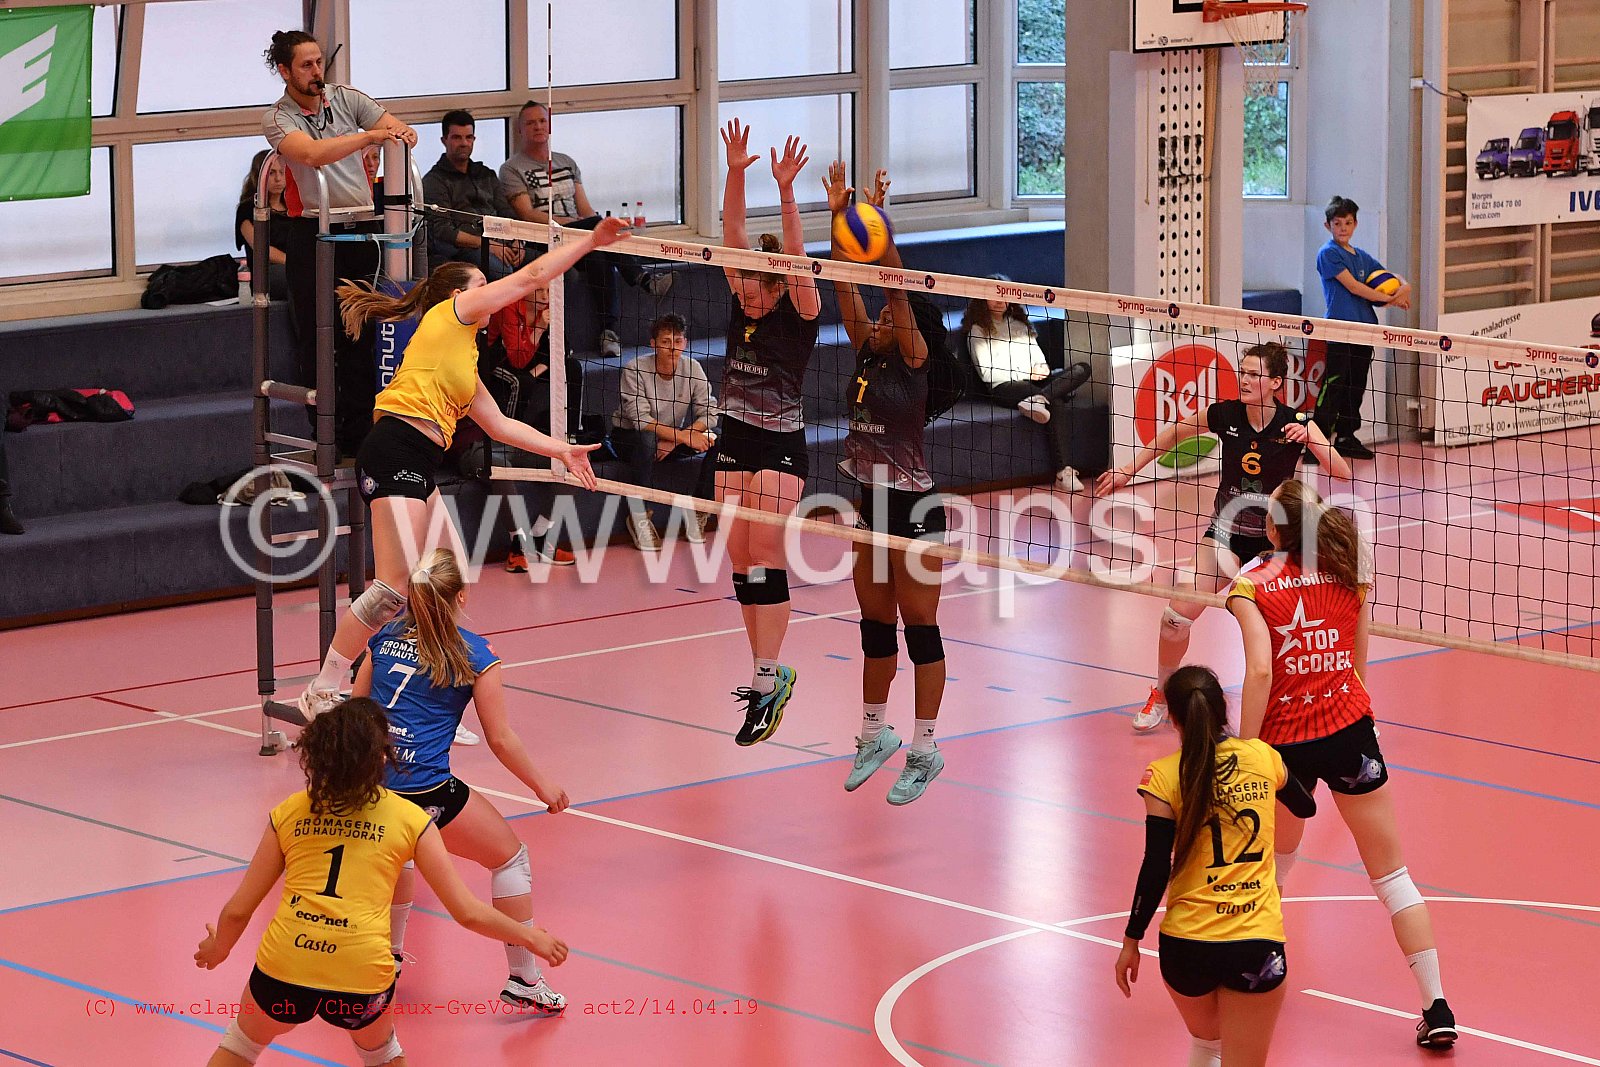 Cheseaux - GeneveVolley